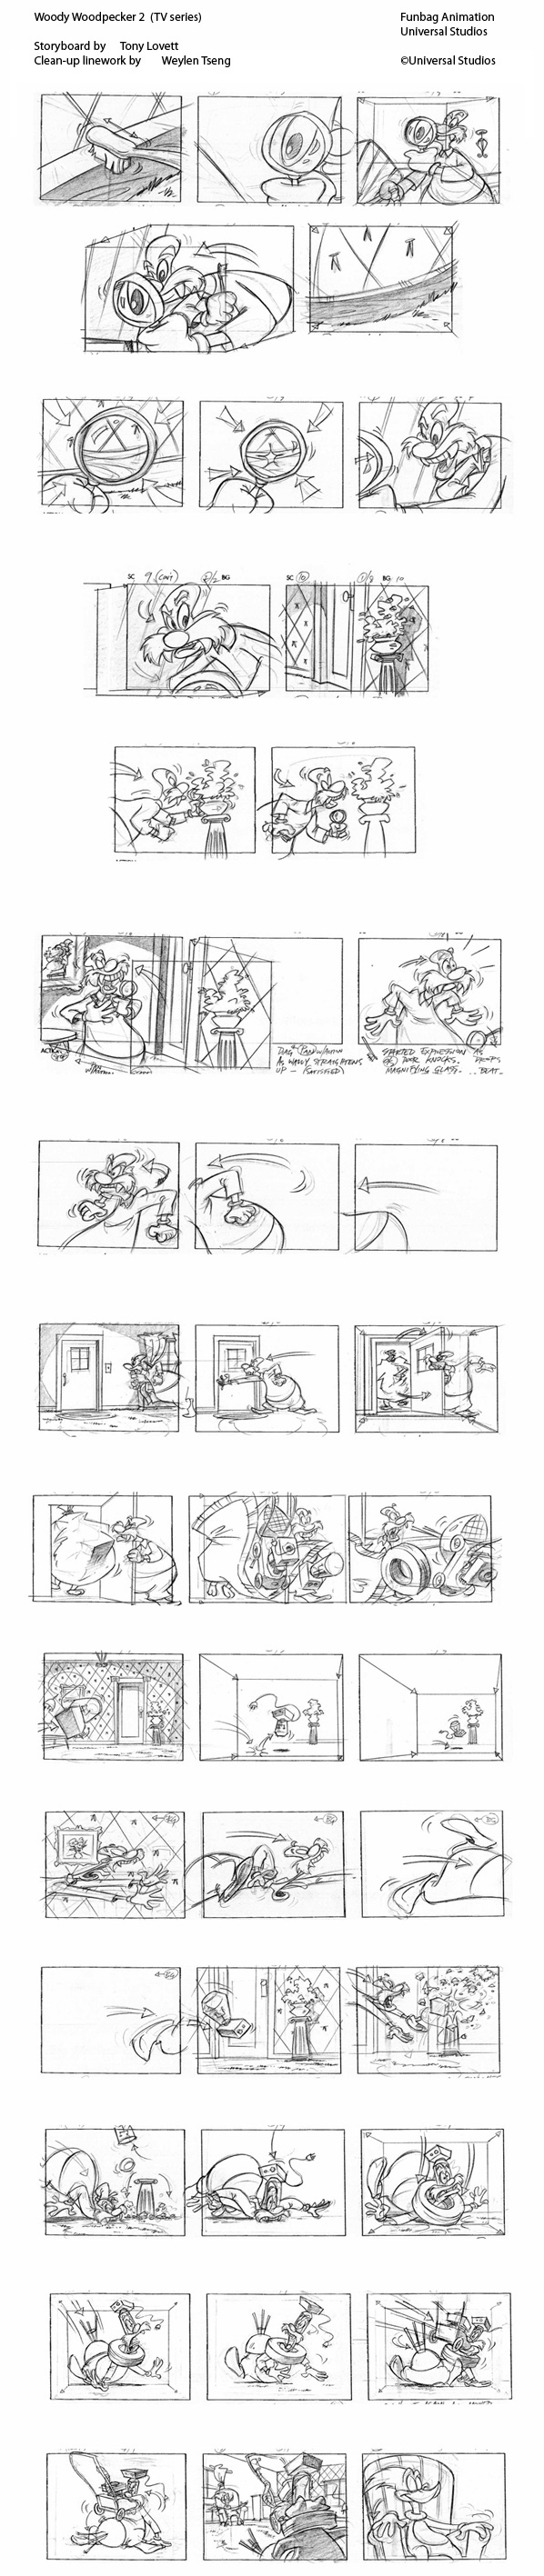 storyboard cartoon Cartoon Storyboard Woody Woodpecker tv television production Sequential Art